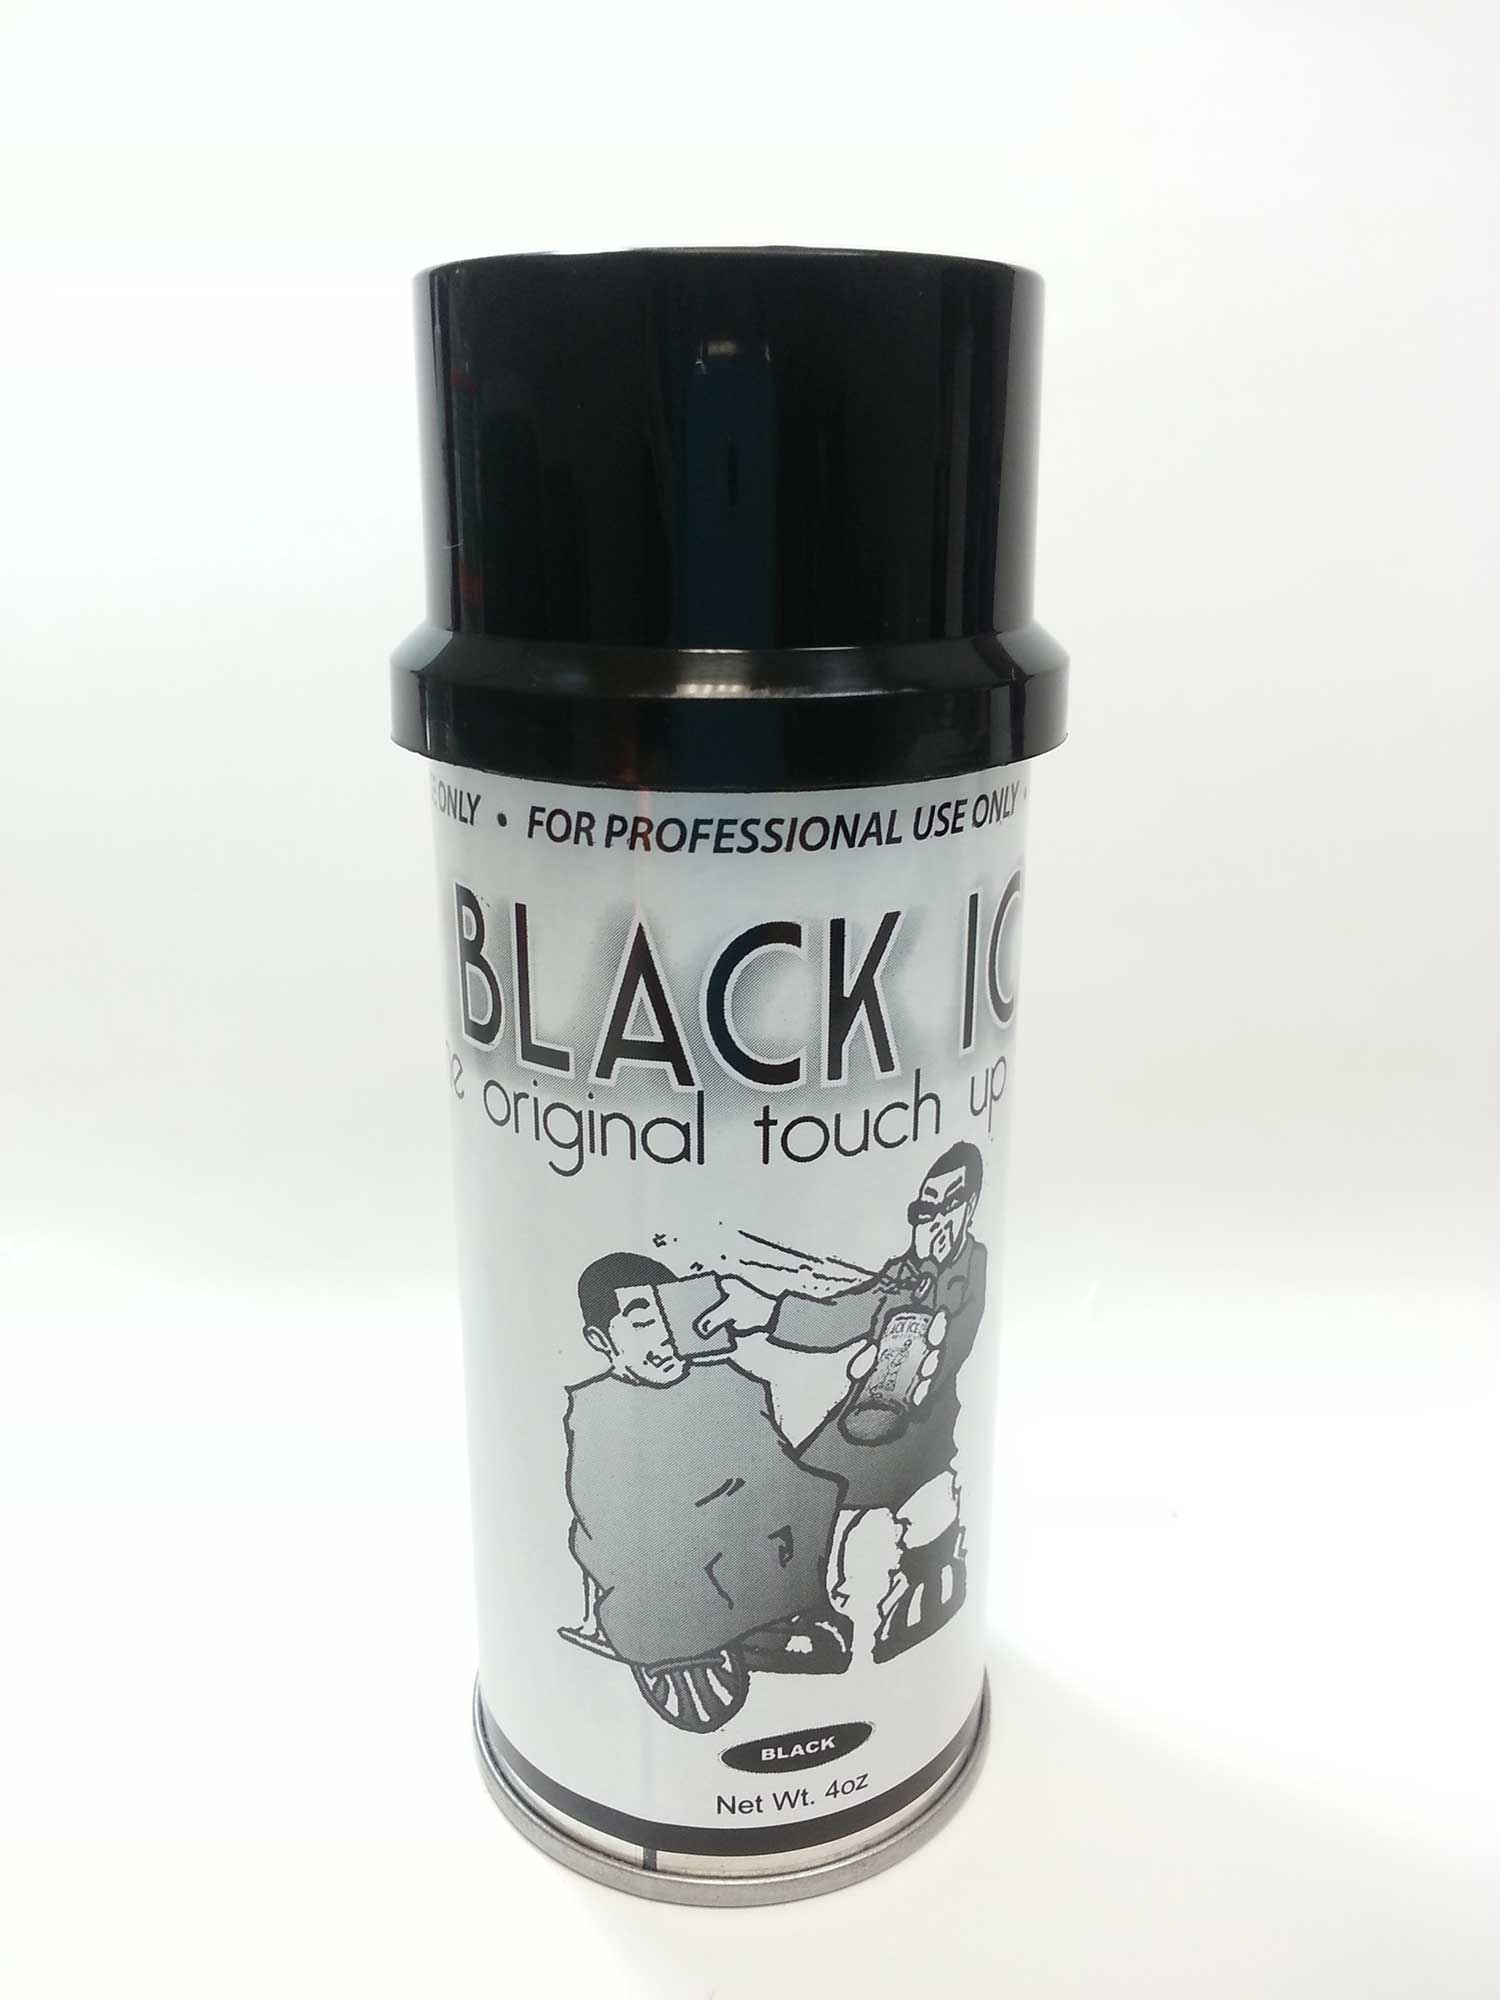 Black Ice The Original Touch Up Spray 4oz Barber Depot